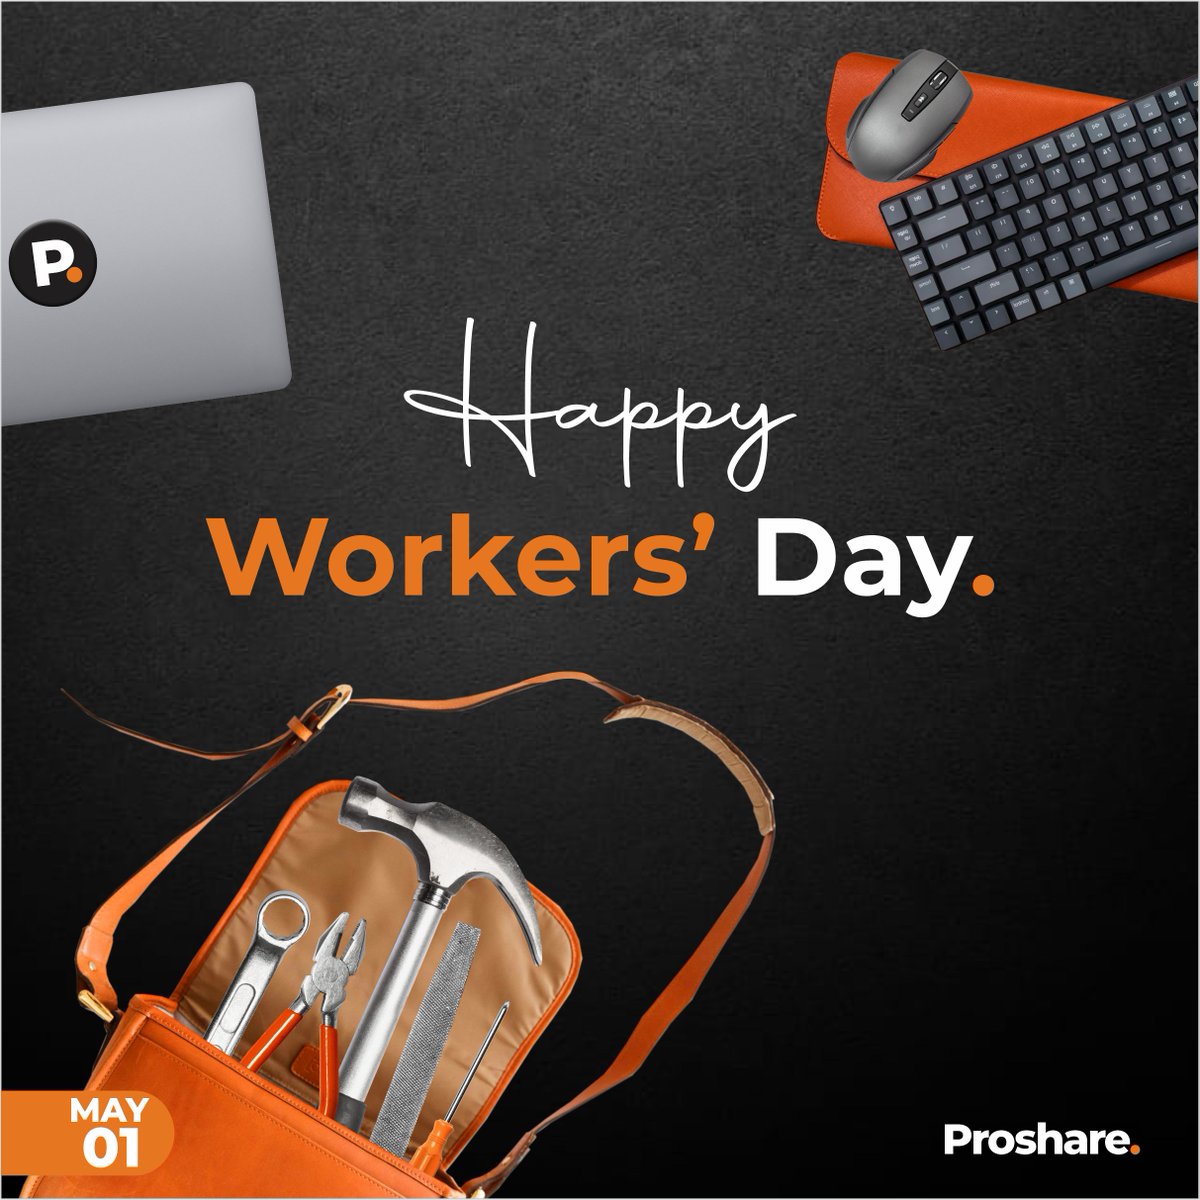 Happy Workers' Day to all the hardworking individuals out there, whether in the office, on the field, or working remotely. #WorkersDay